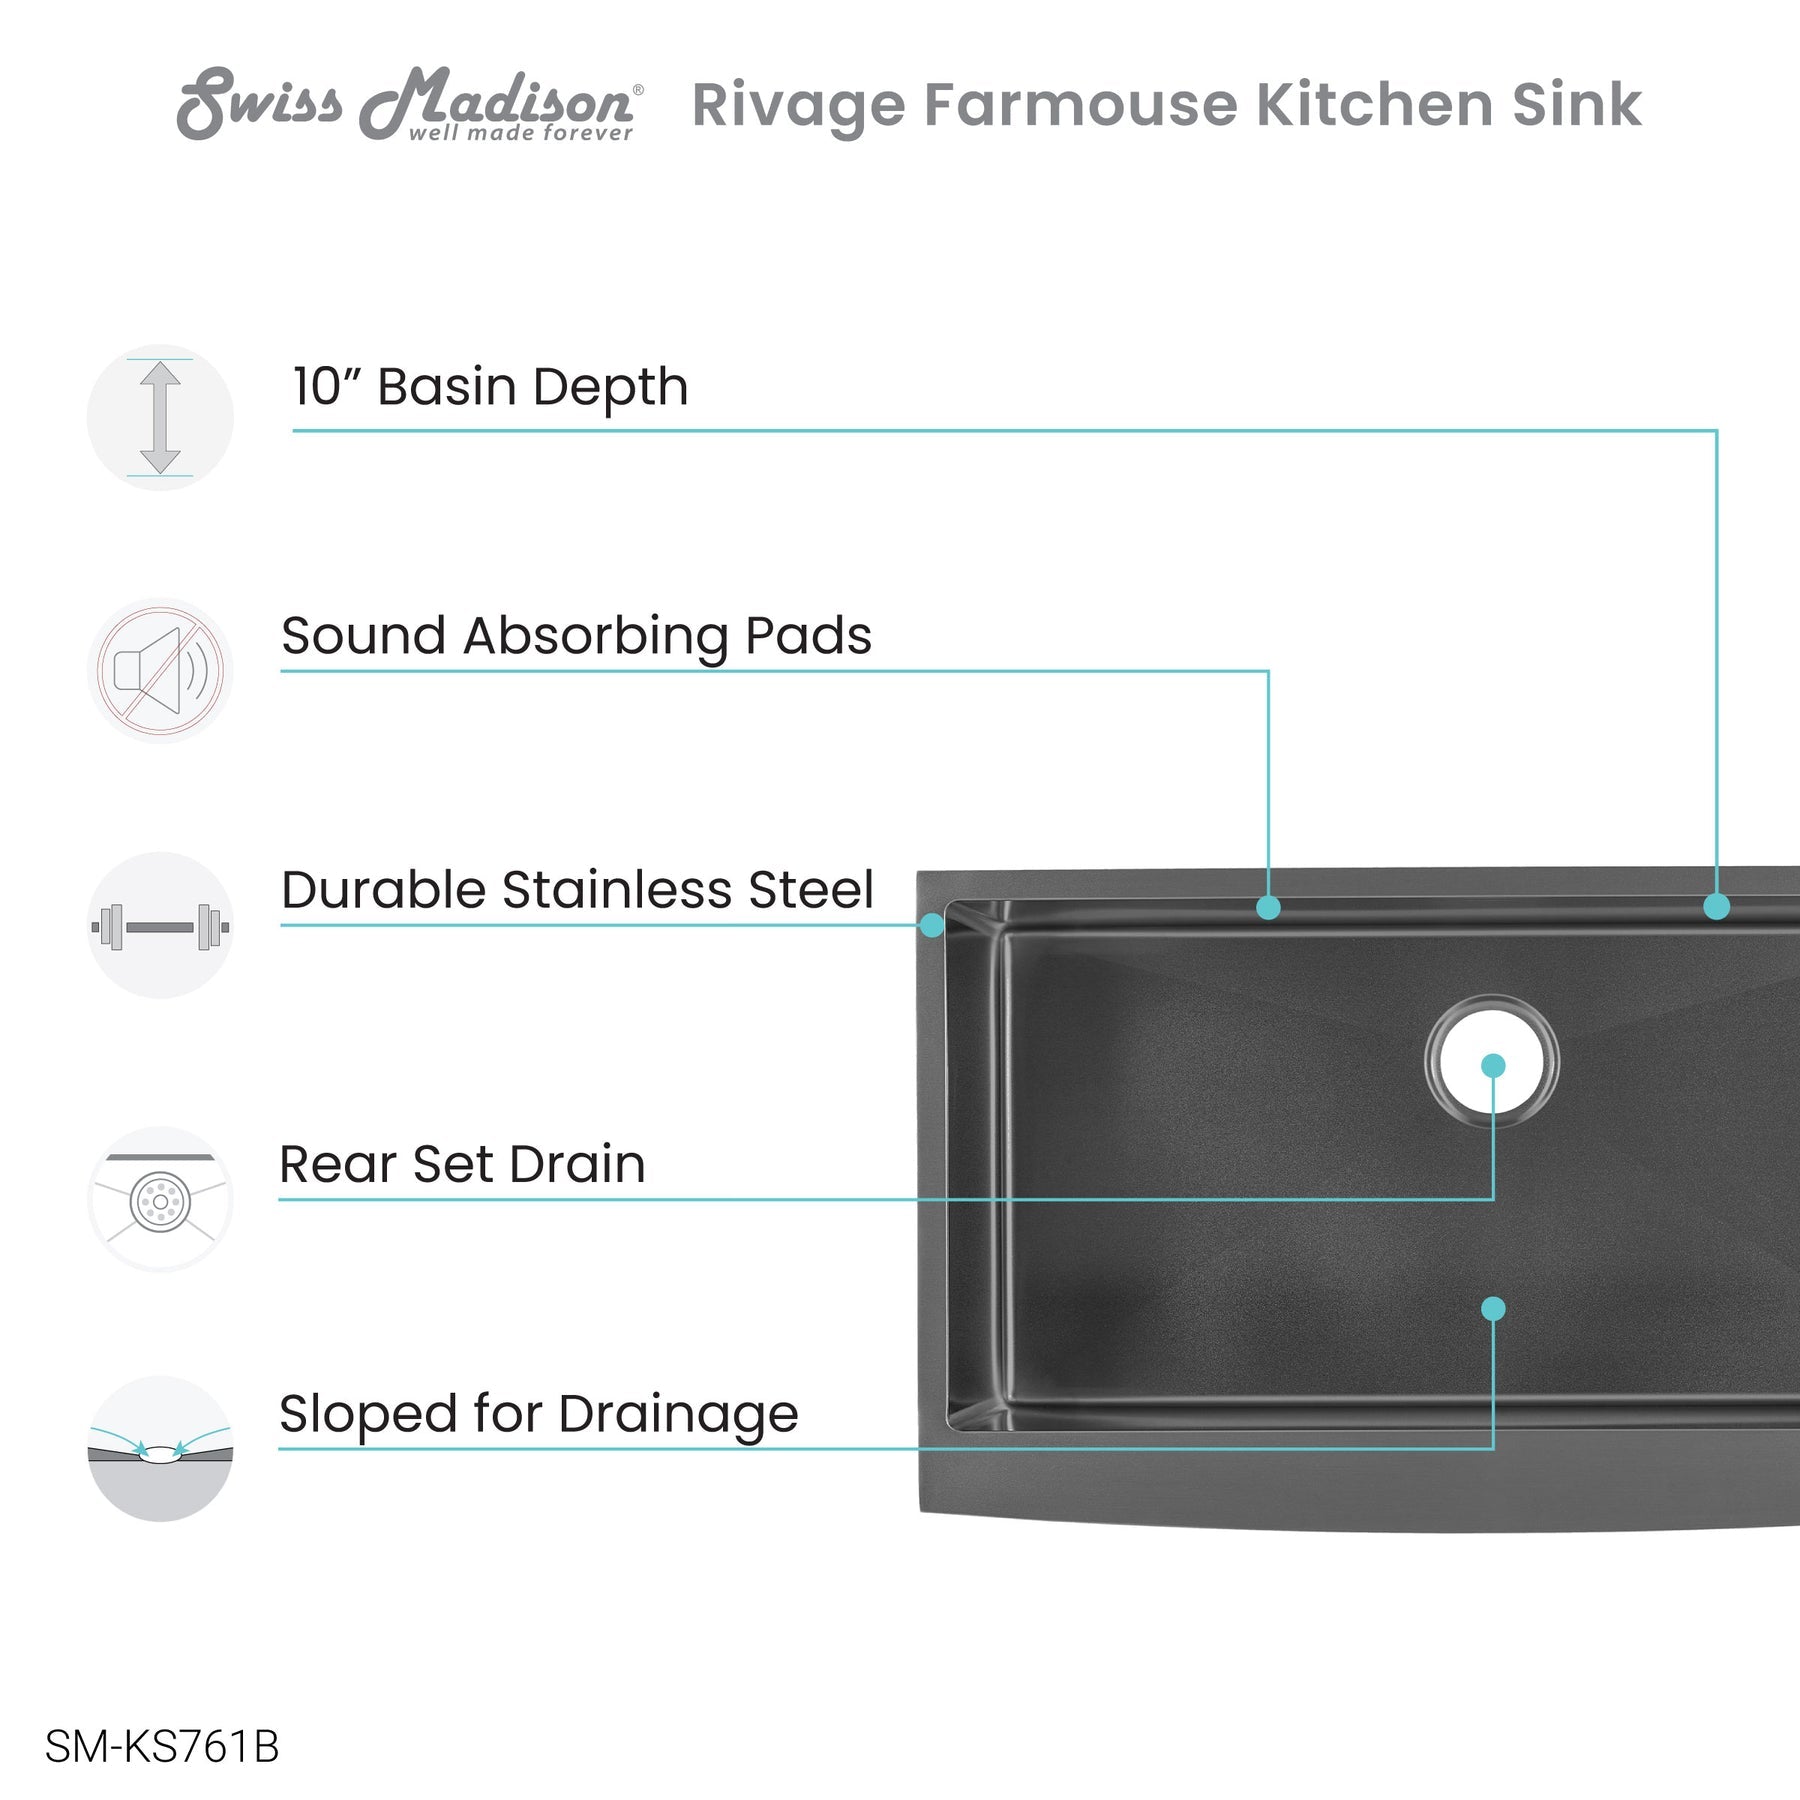 Swiss Madison Rivage 36" x 21" Stainless Steel, Single Basin, Farmhouse Kitchen Sink with Apron - SM-KS761